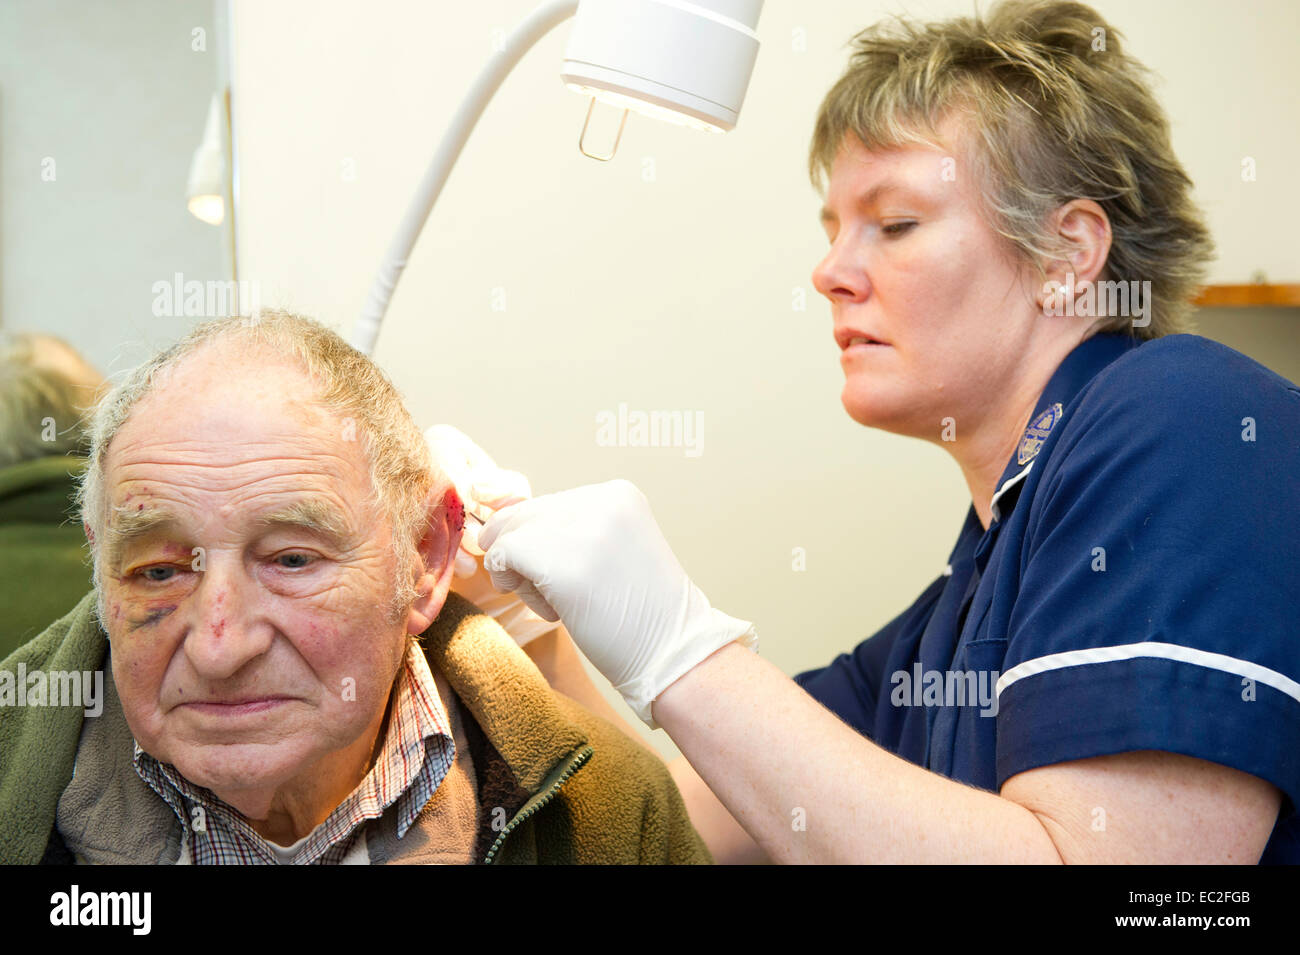 An NHS nurse examining a patient at a medical centre center Stock Photo